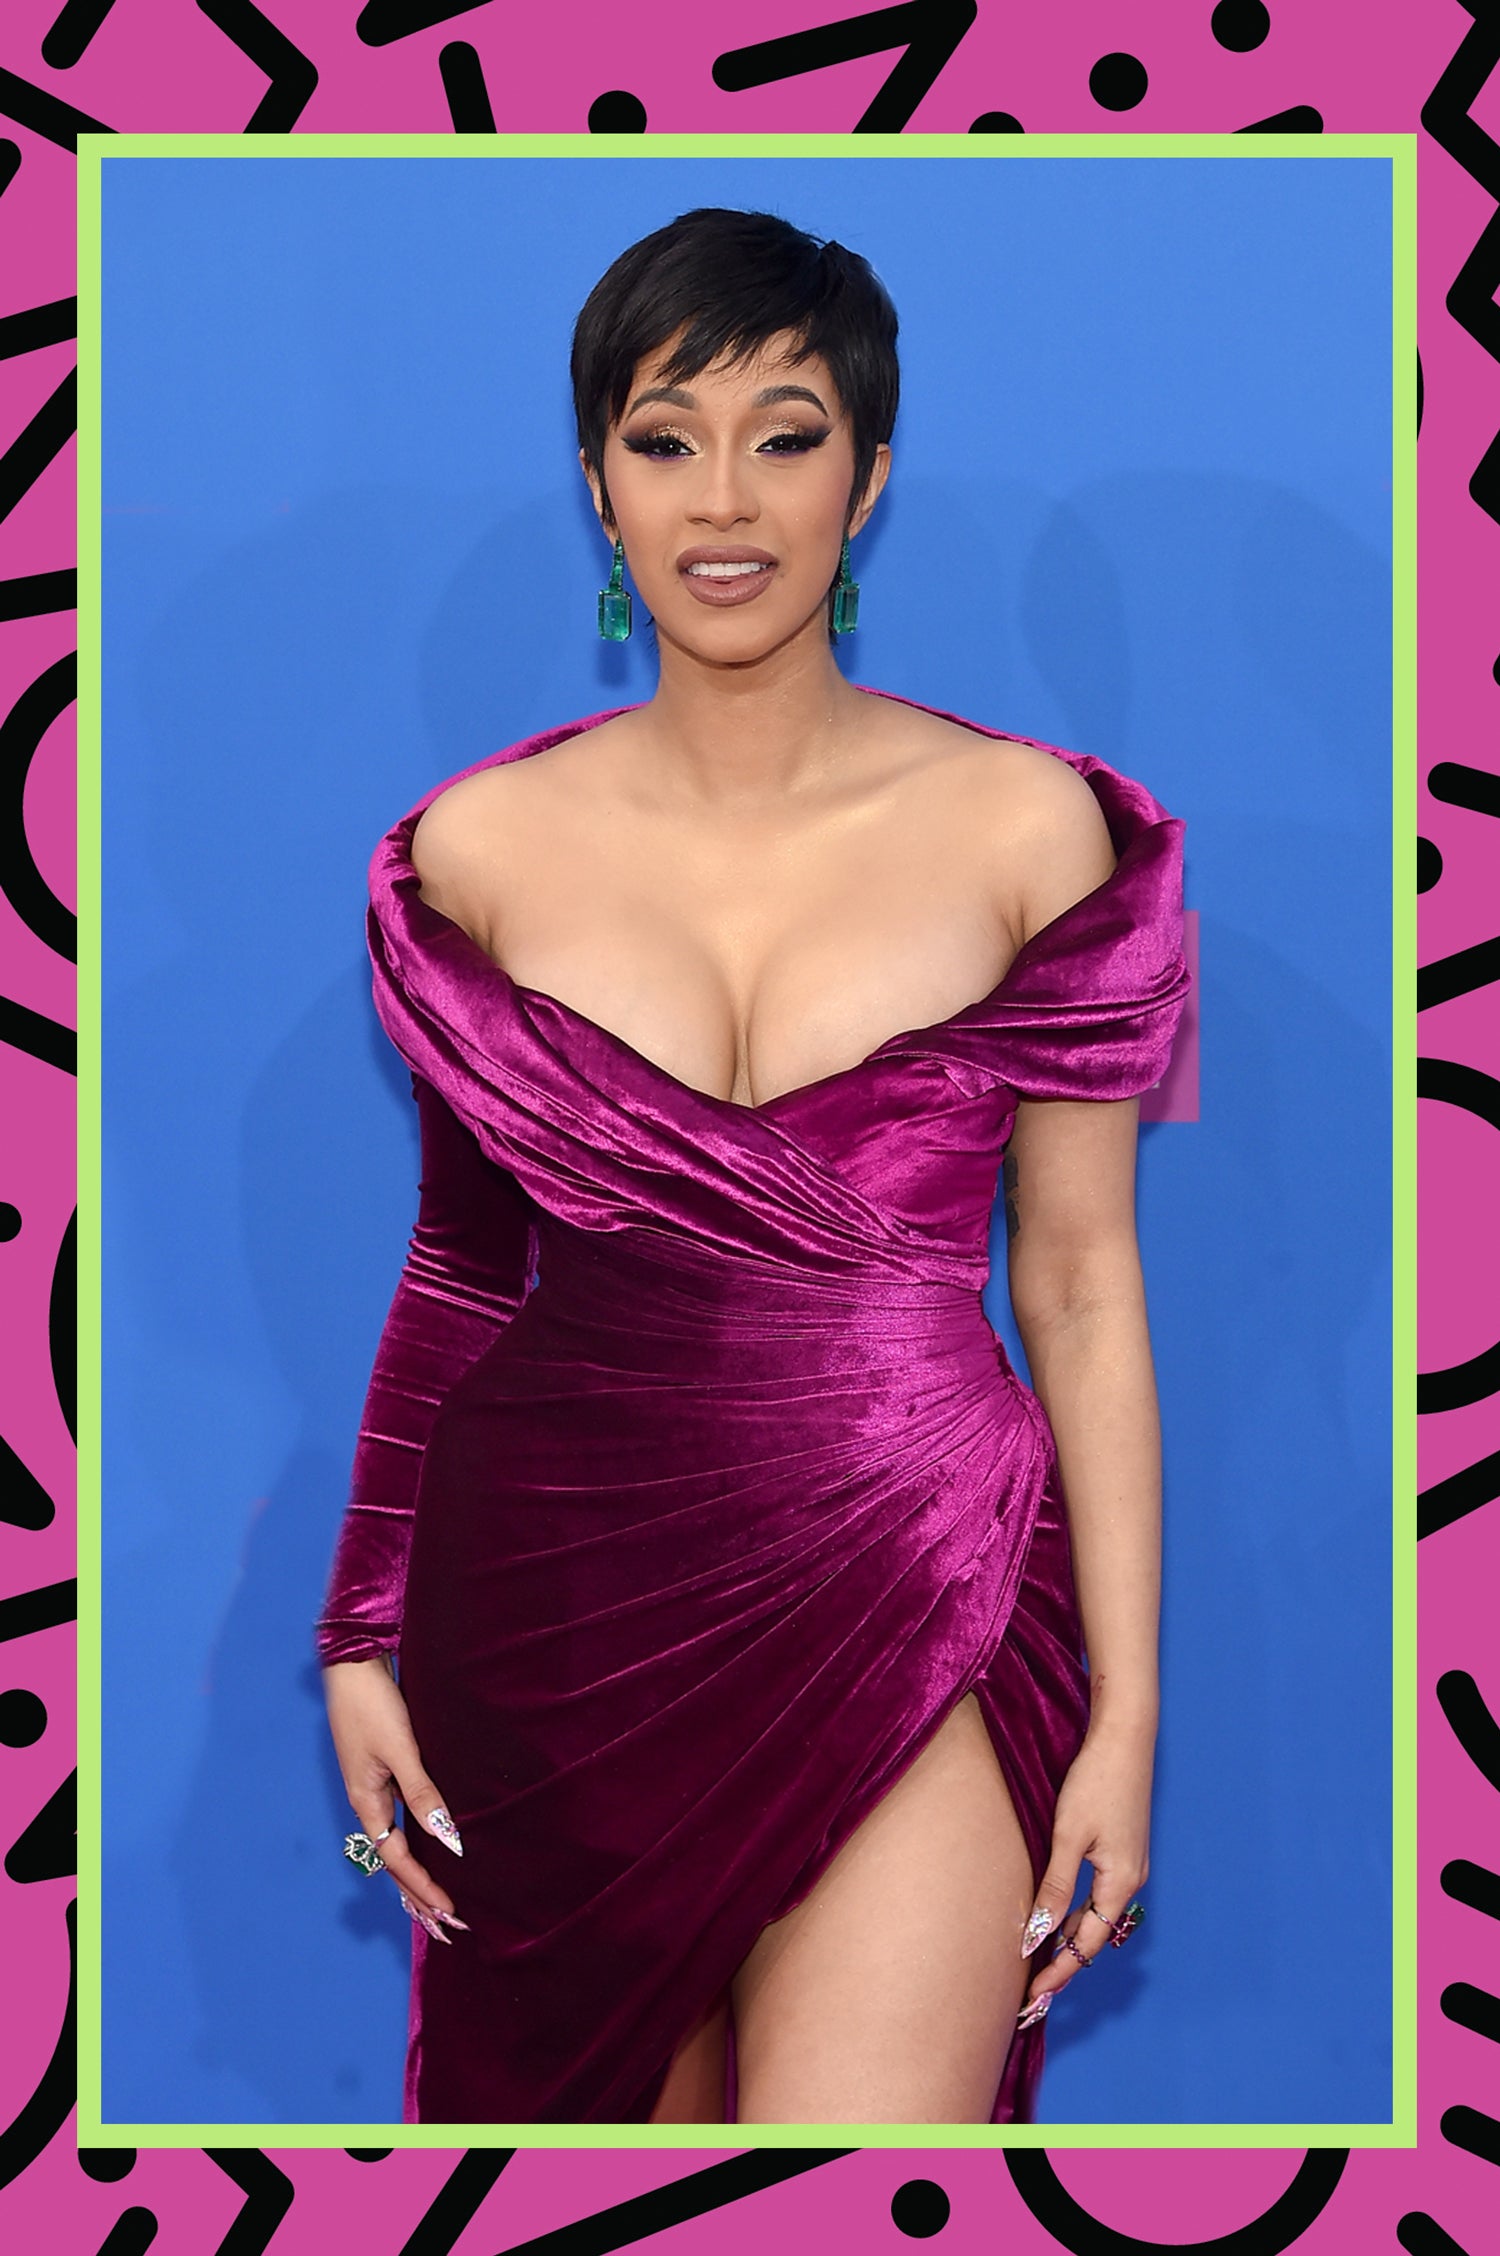 Cardi B Poses Nude Weeks After Giving Birth To Newborn Daughter Kulture